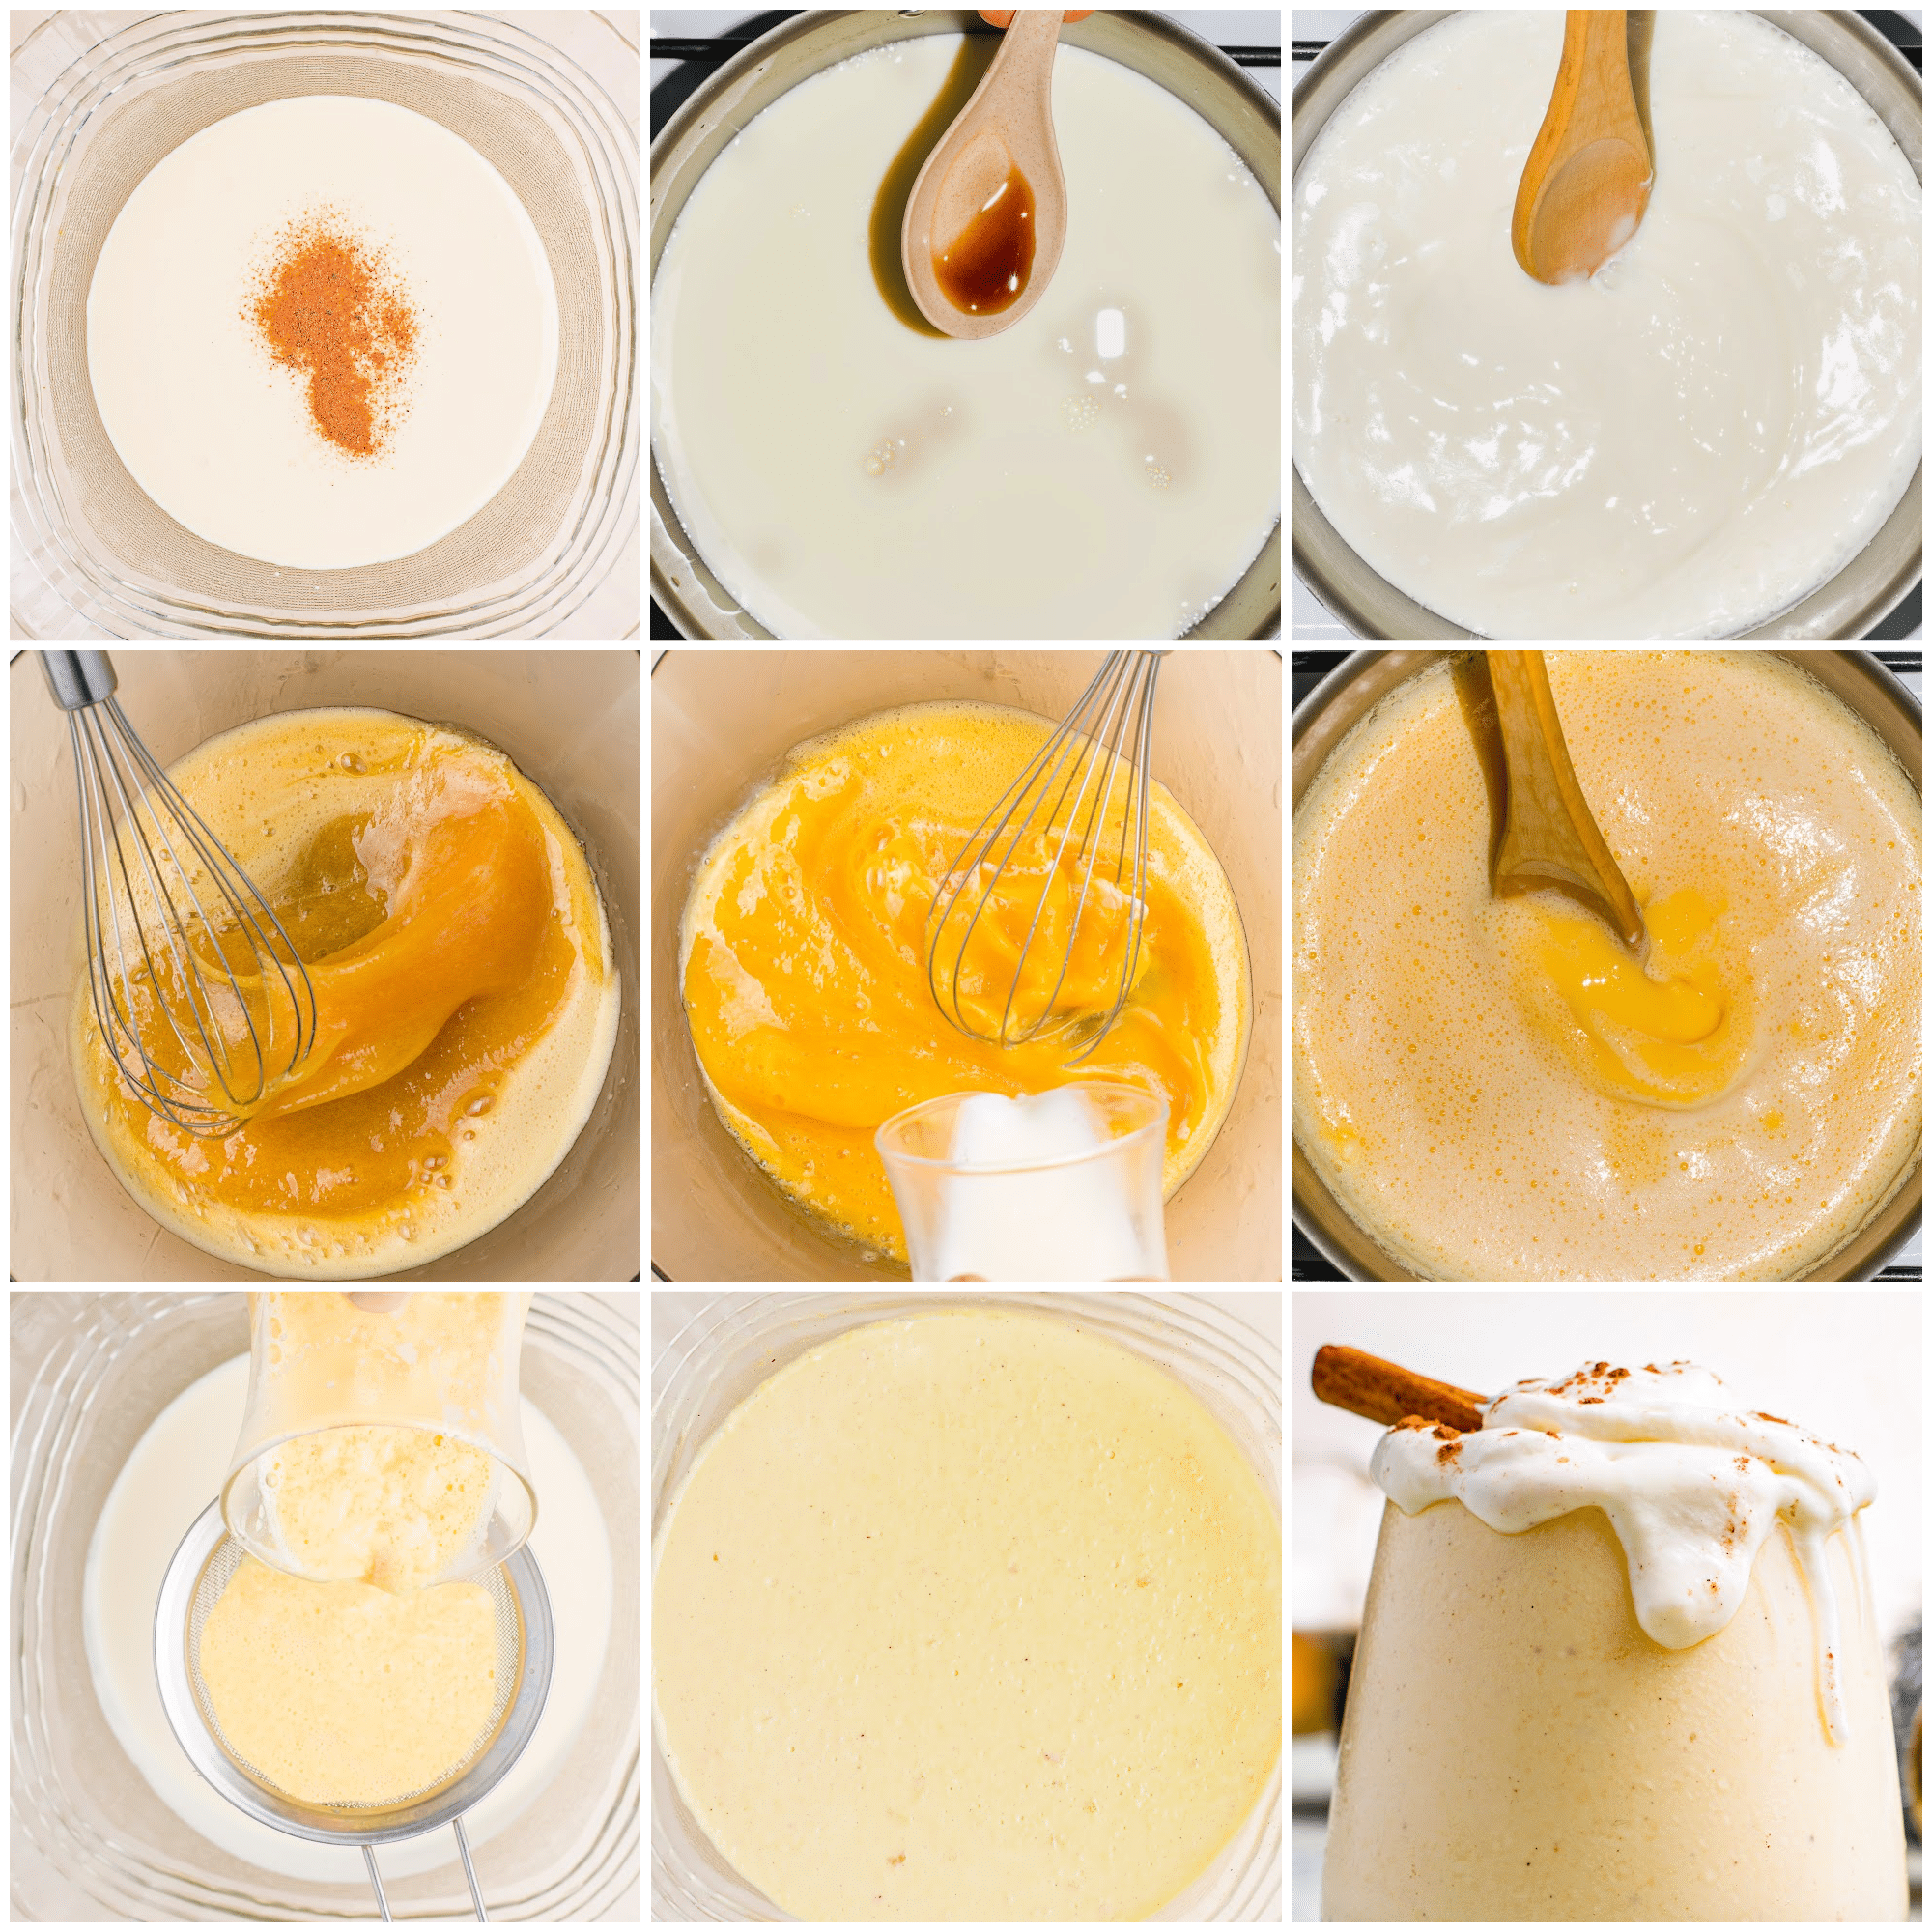 Collage image showing step by step instructions to make egg nog.